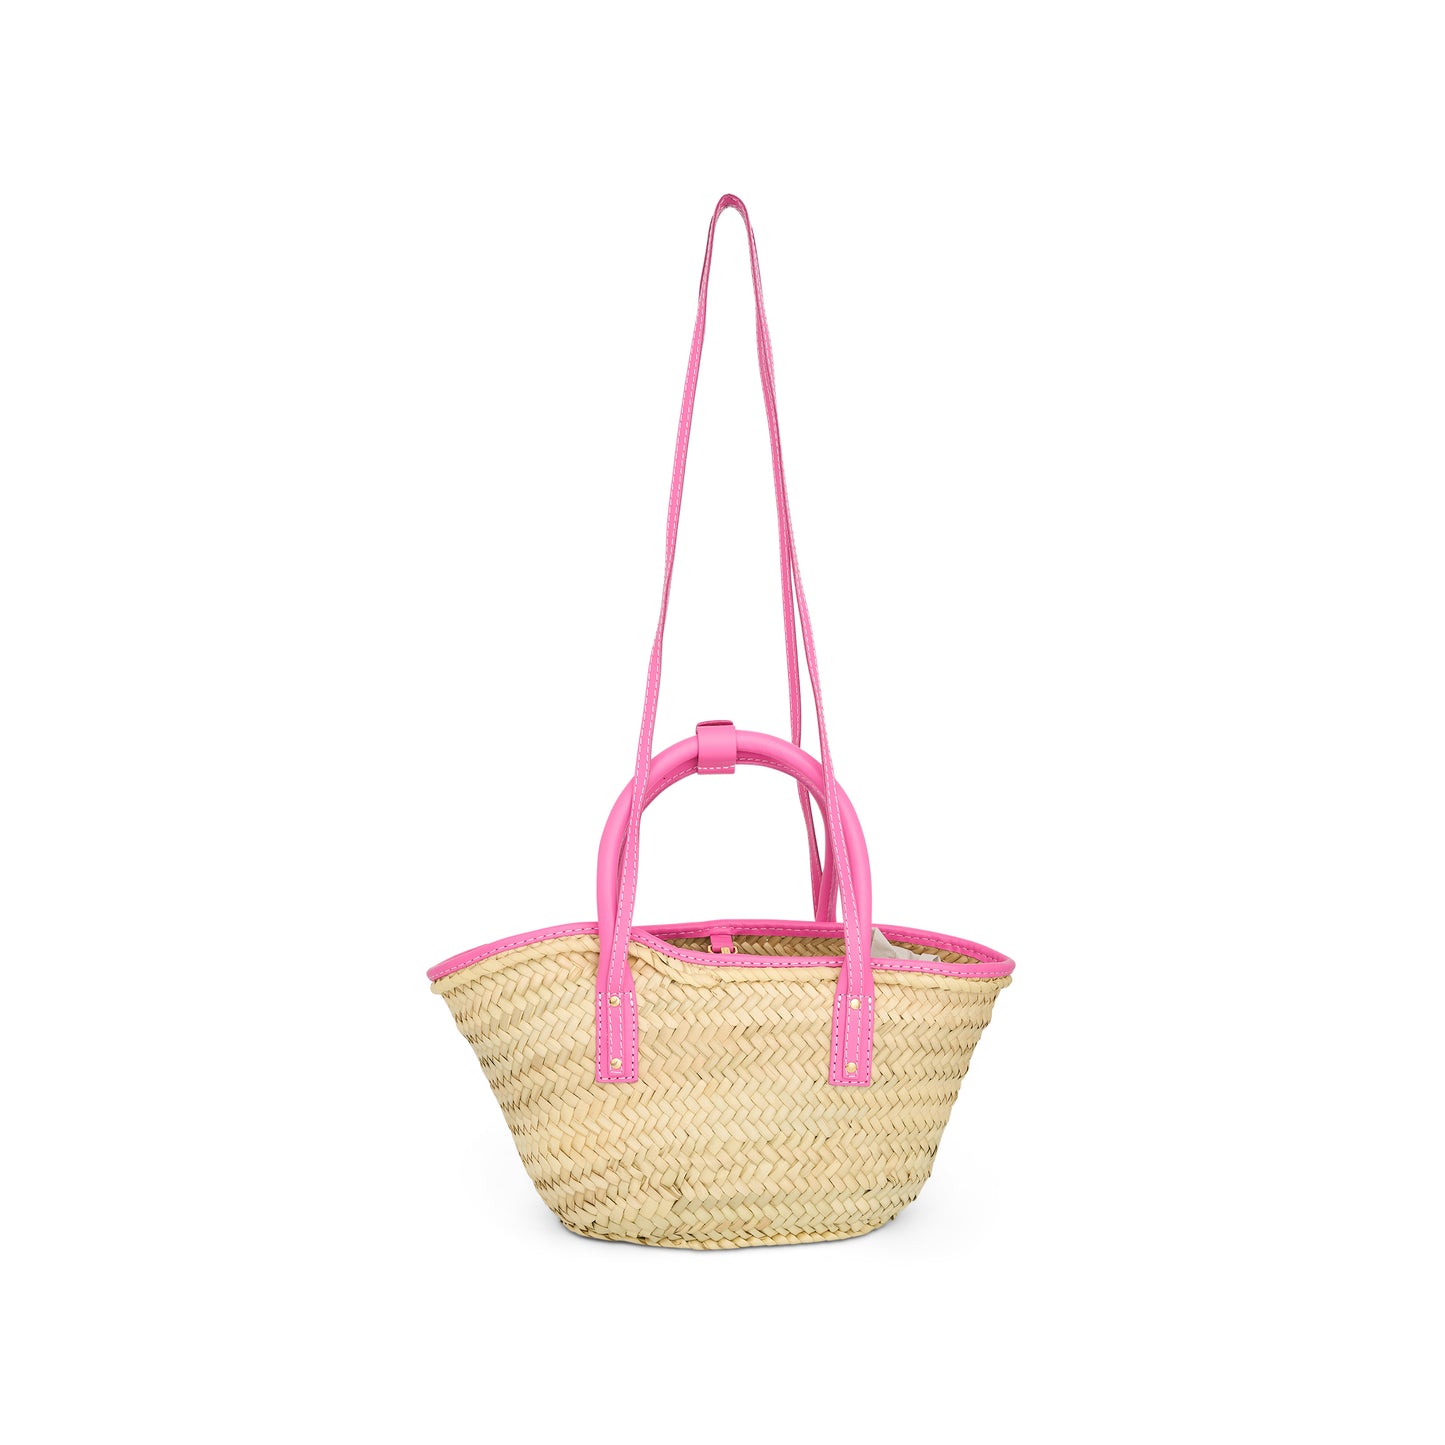 Le Petit Panier Soli Straw & Leather Bag in Neon Pink